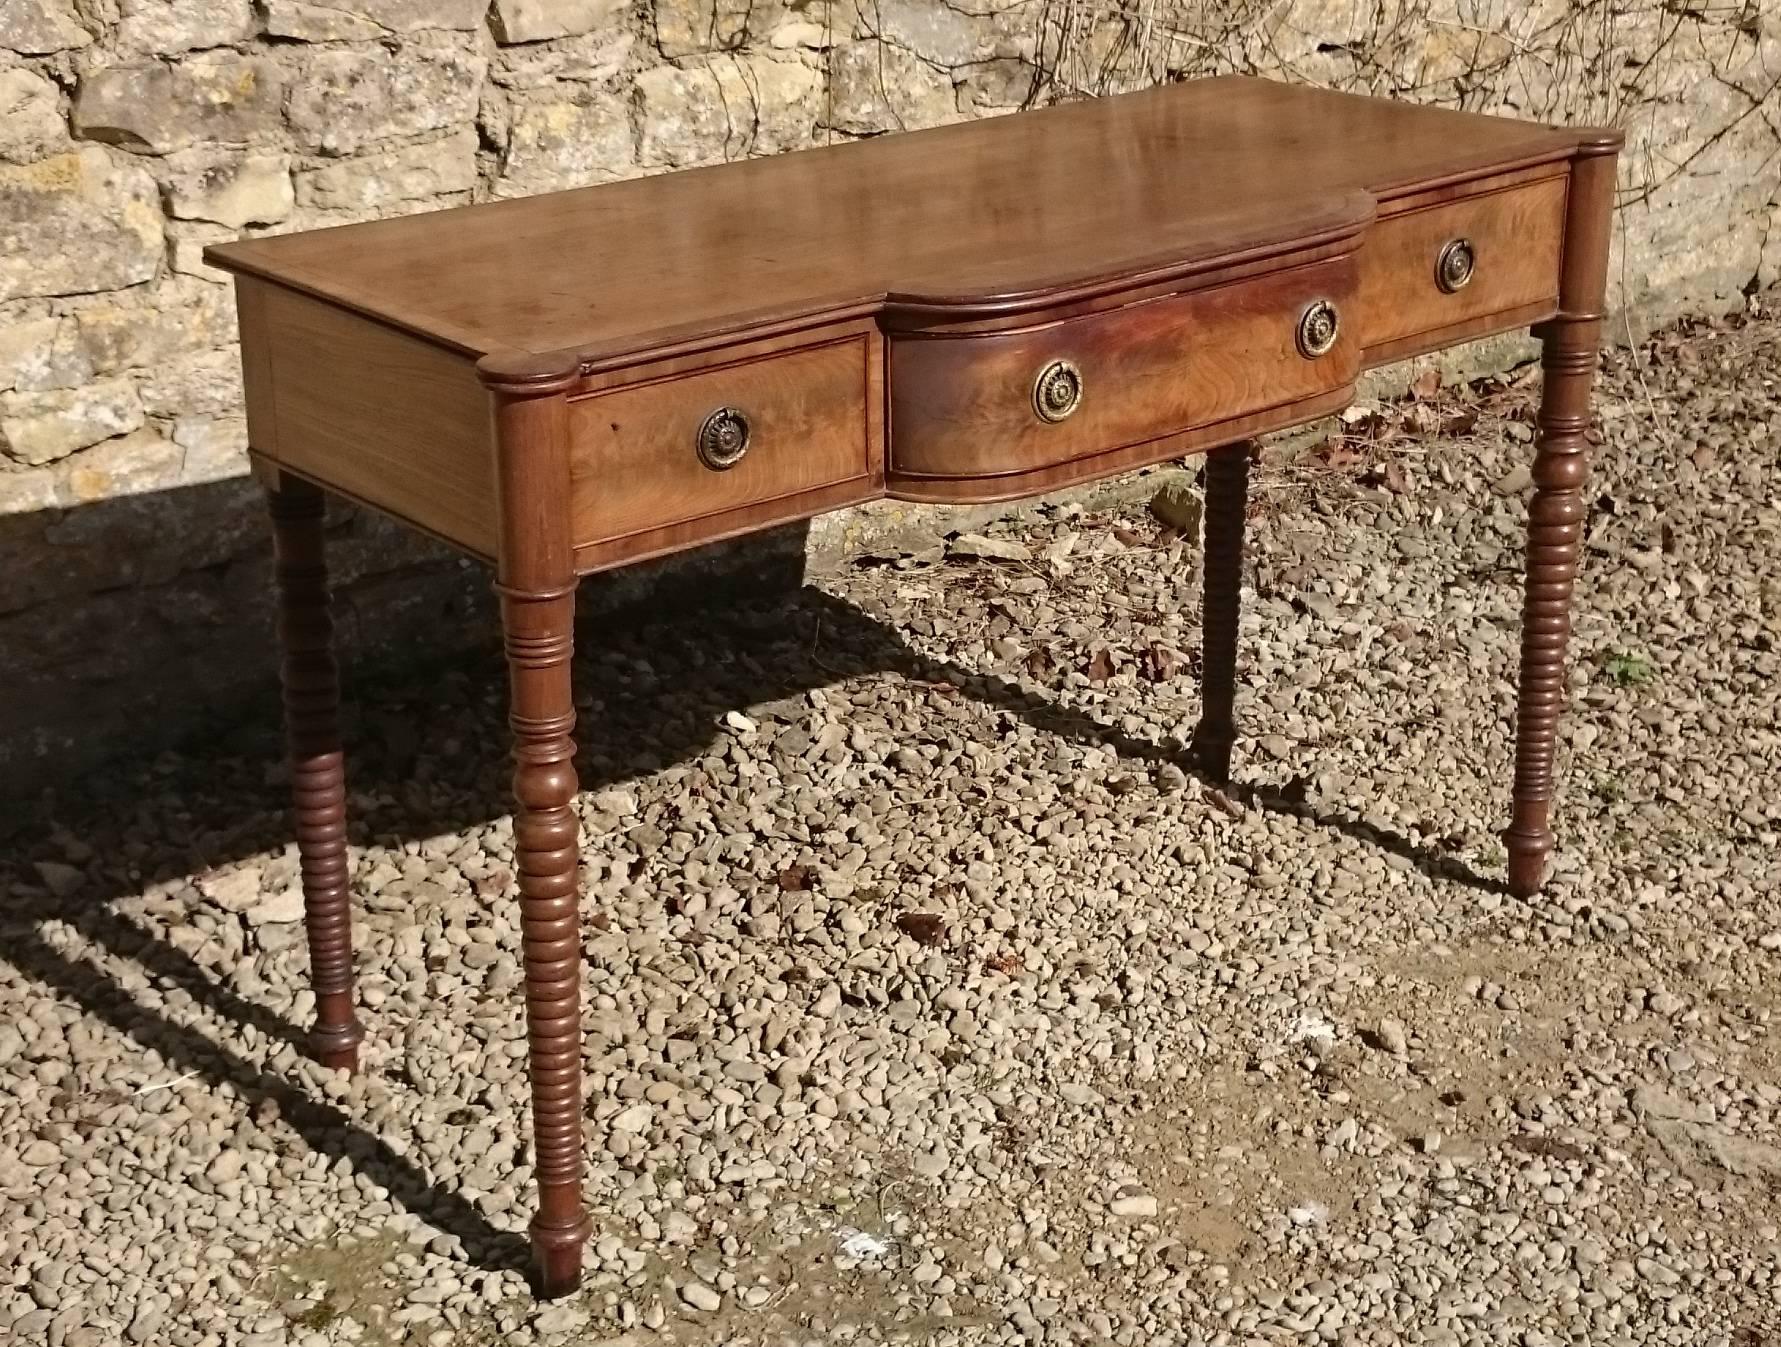 Regency mahogany antique side board or serving table. This table has faded to a fashionable pale honey colour while retaining a good patina. Photographed here before restoration, this table can be restored by our in house restorers to your